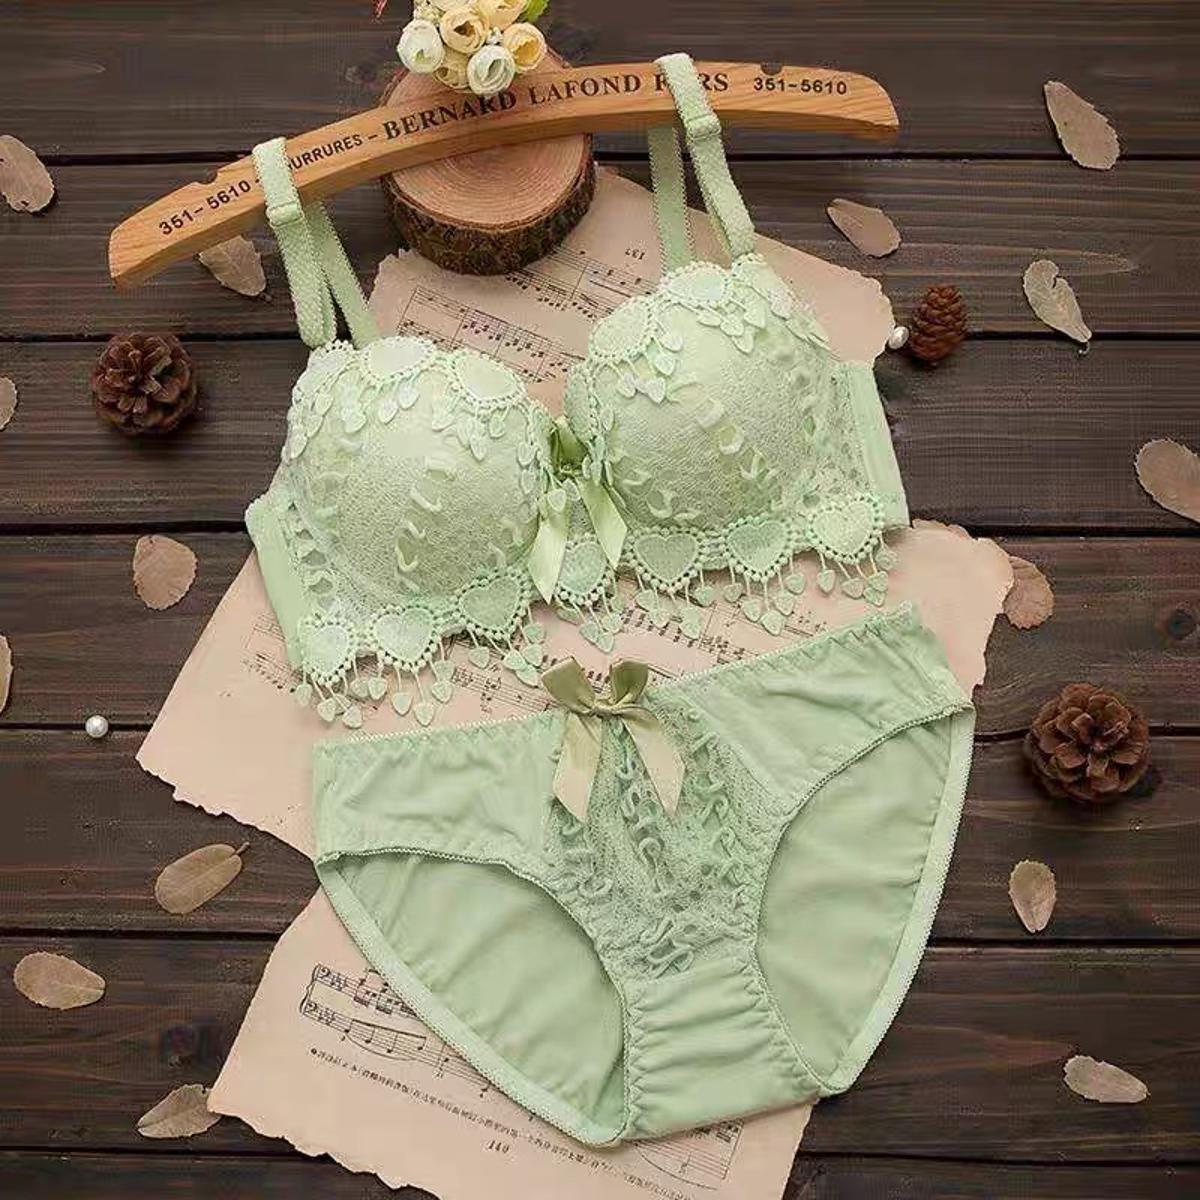 New Sexy Design Bra Set Unique Lace Style With painty Set For